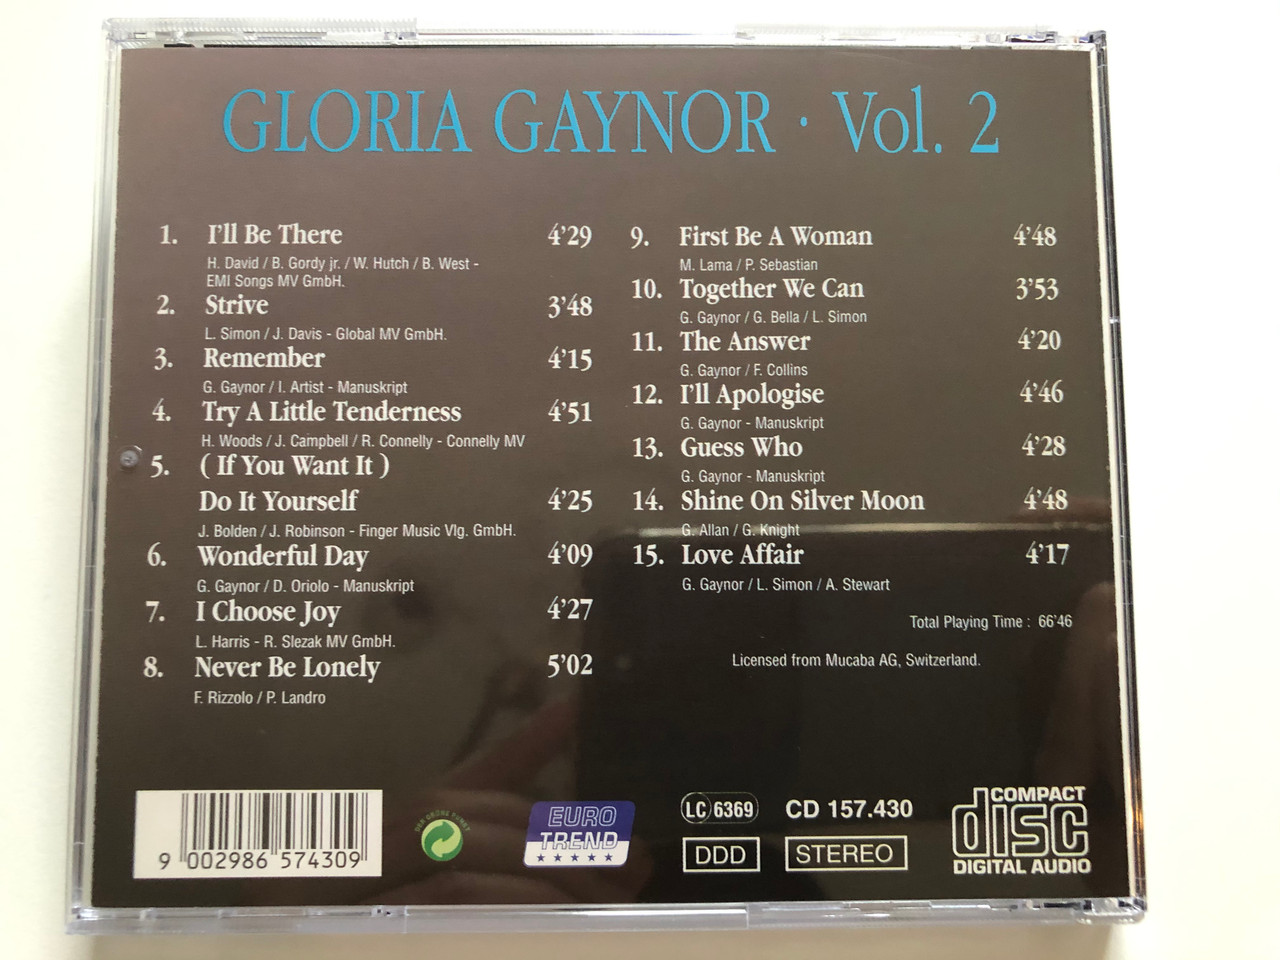 https://cdn10.bigcommerce.com/s-62bdpkt7pb/products/30062/images/178384/The_Best_Of_Gloria_Gaynor_-_Vol.2_Ill_Be_There_Rememeber_Try_A_Little_Tenderness_I_Choose_Joy_First_Be_A_Woman_Together_We_Can_Guess_Who_Eurotrend_Audio_CD_Stereo_CD_157_4__98830.1621233594.1280.1280.JPG?c=2&_ga=2.100799617.121704874.1621271157-442397351.1621271157